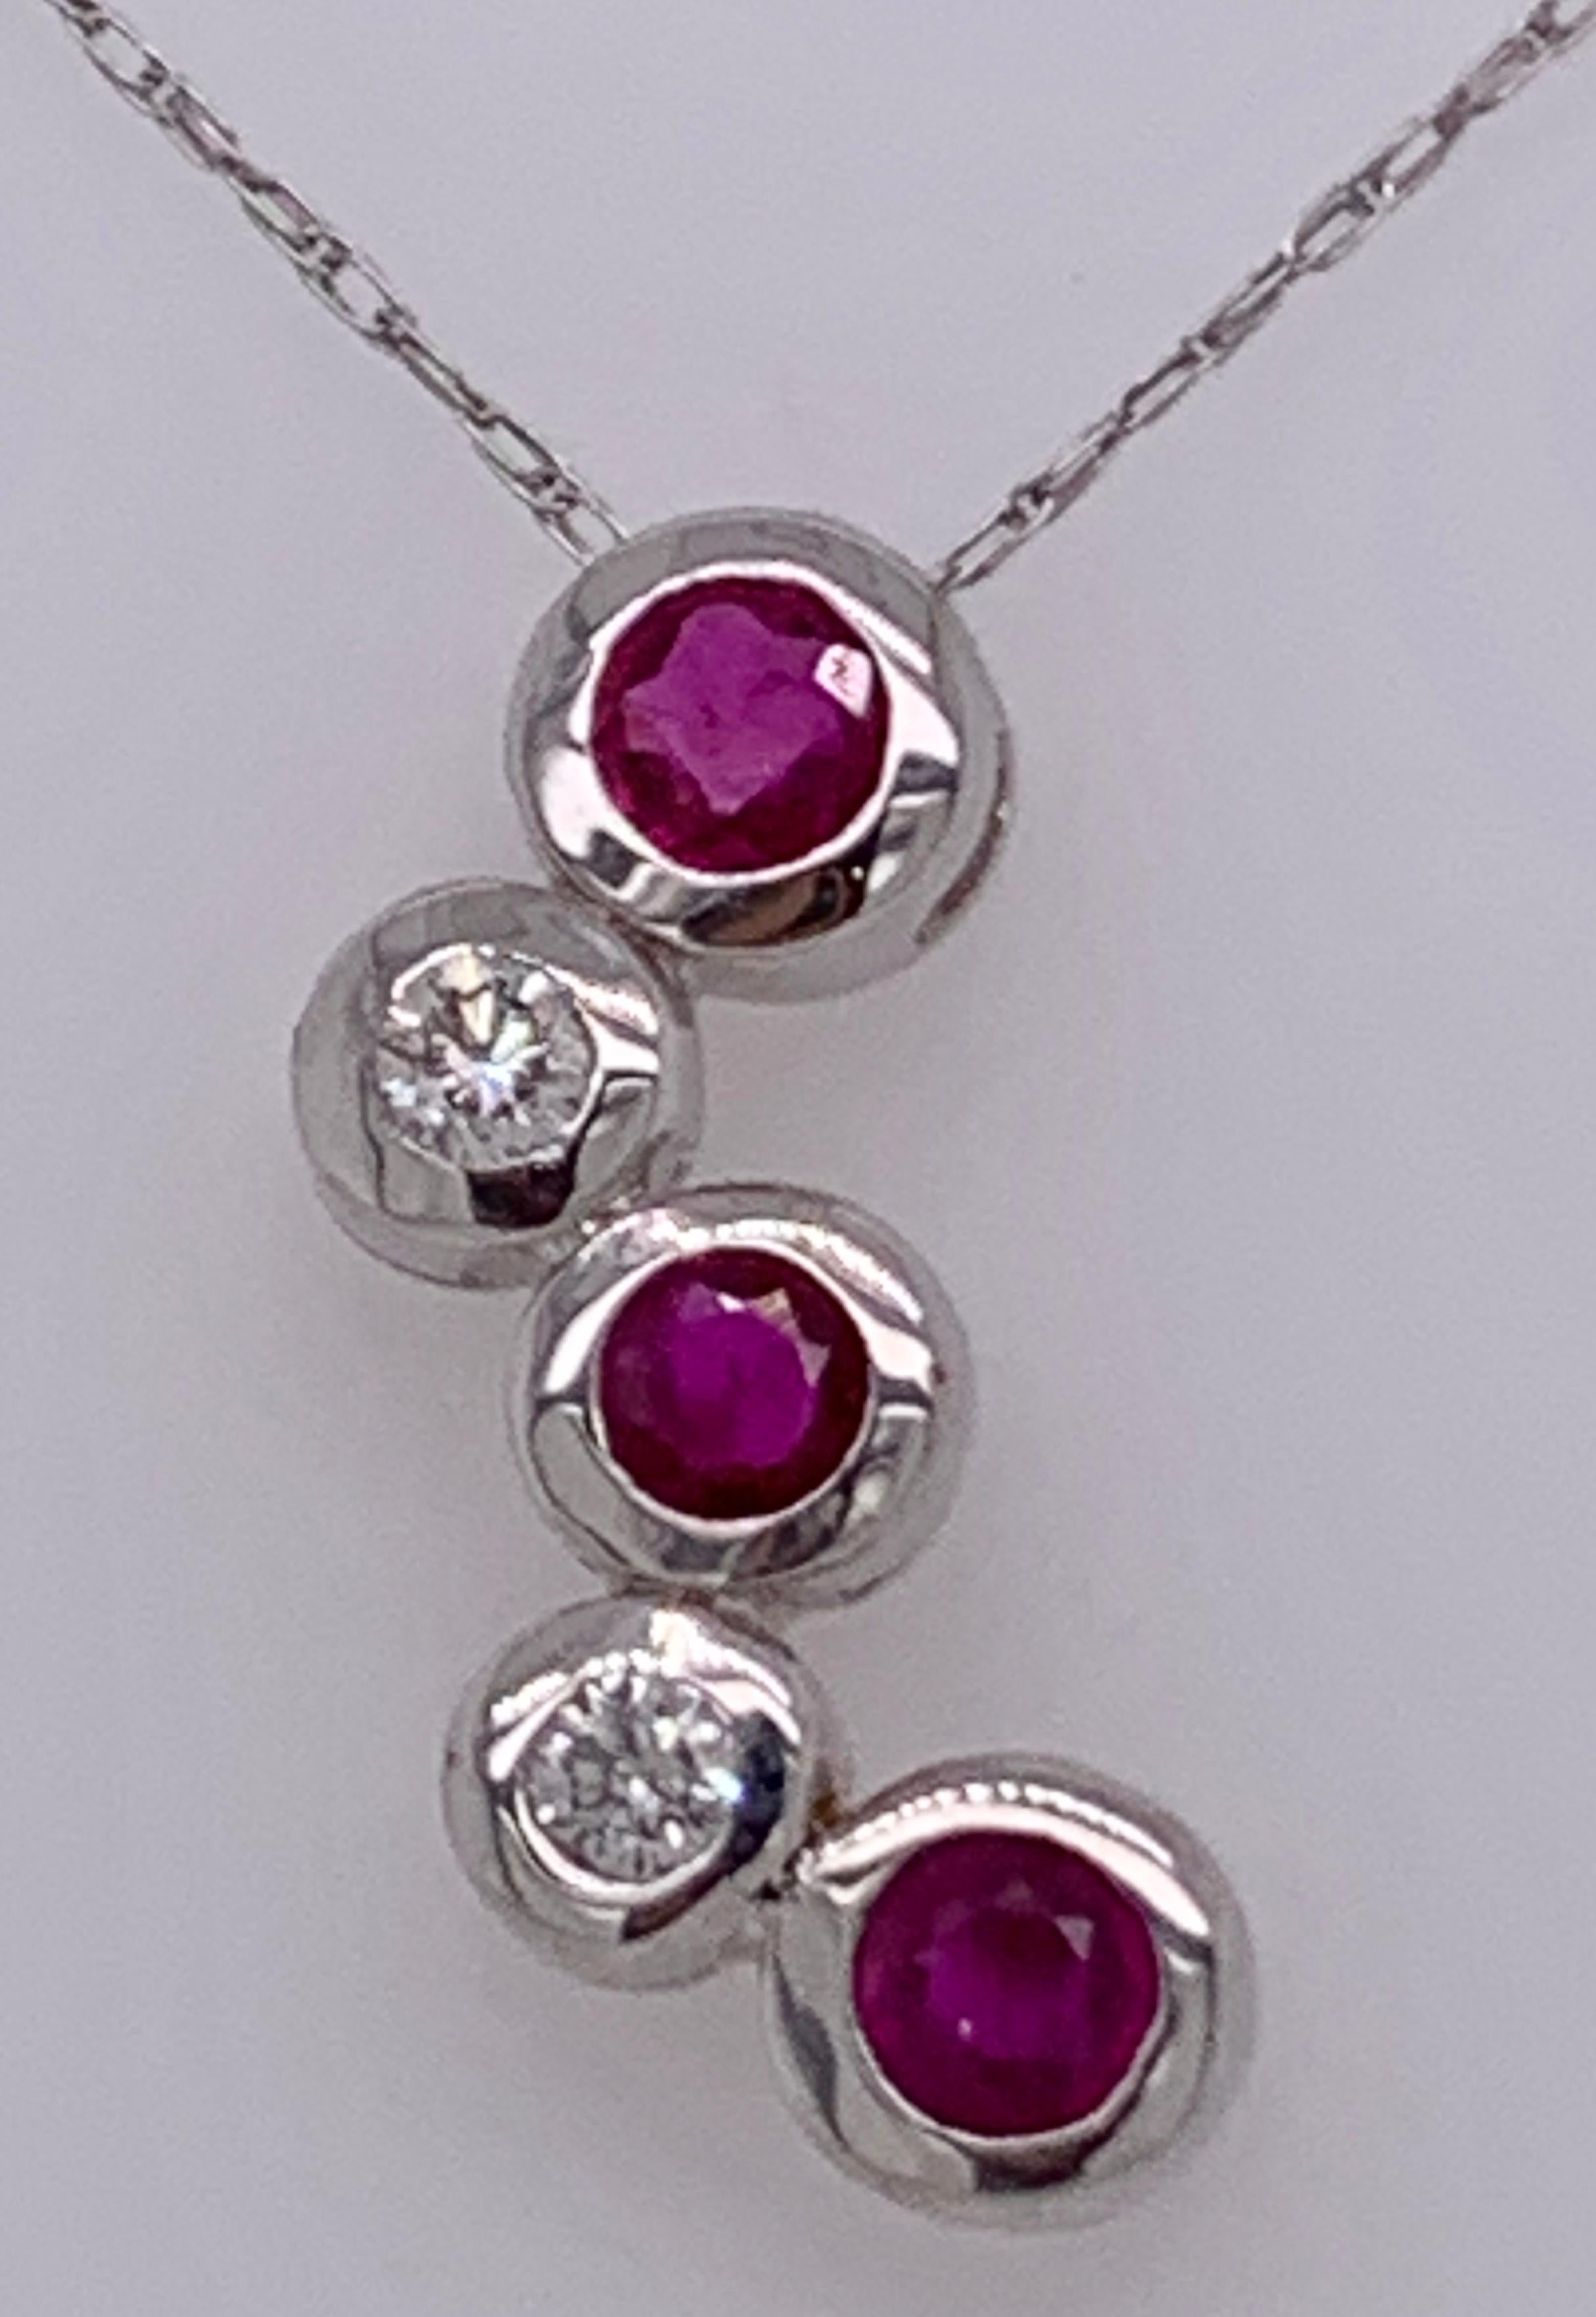 Women's or Men's 14kt Gold Ruby and Diamond Necklace Having 3 Rubies and 2 Round Diamonds For Sale